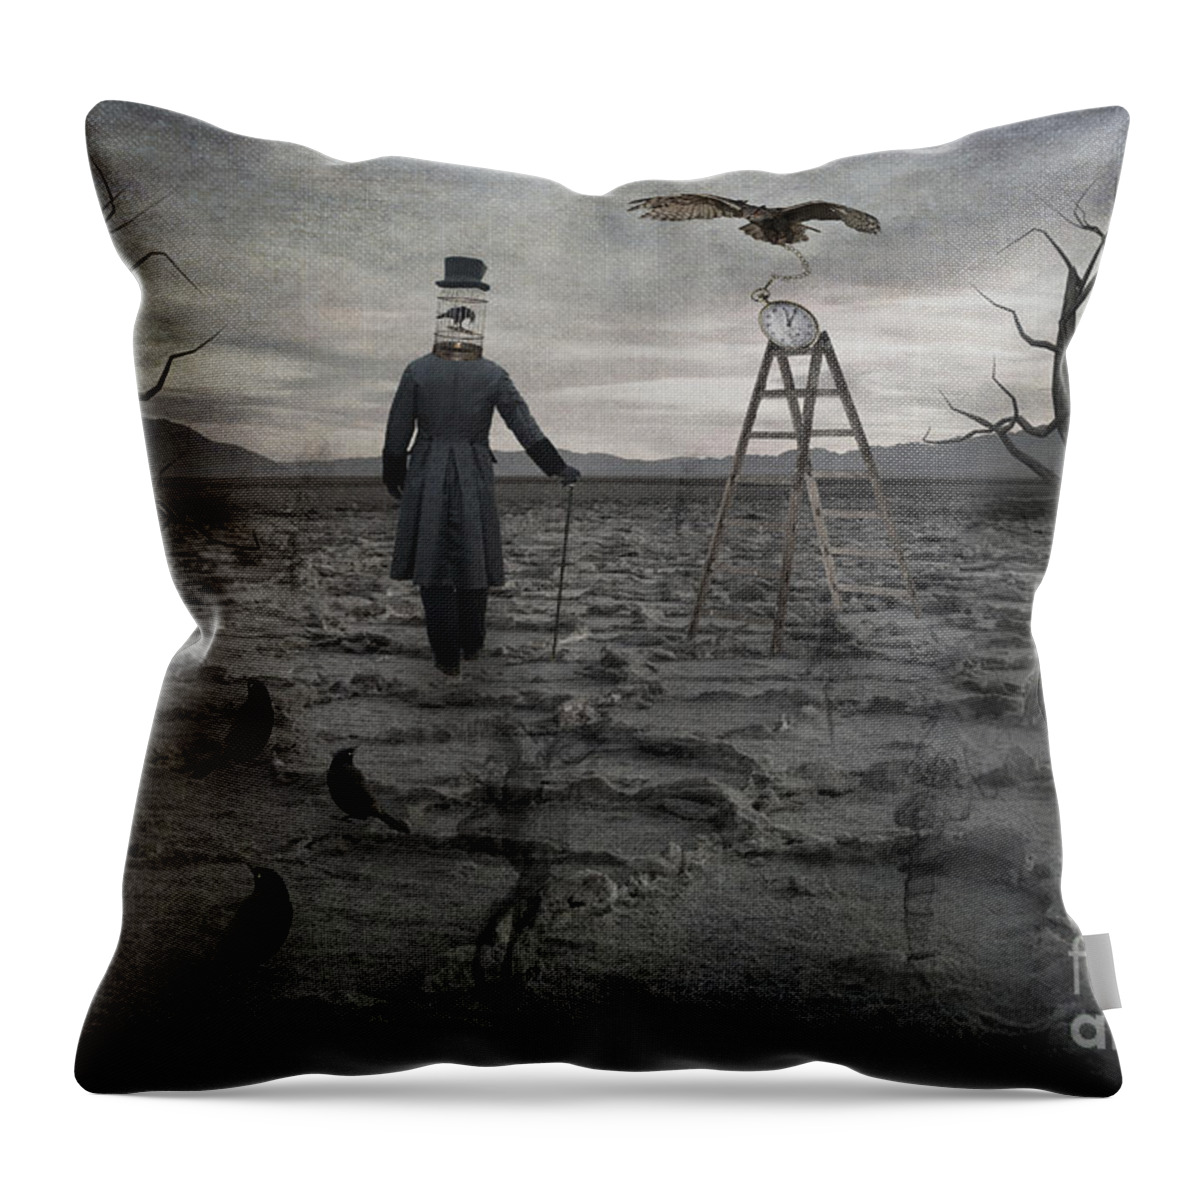 Badwater Throw Pillow featuring the photograph The Magician by Juli Scalzi